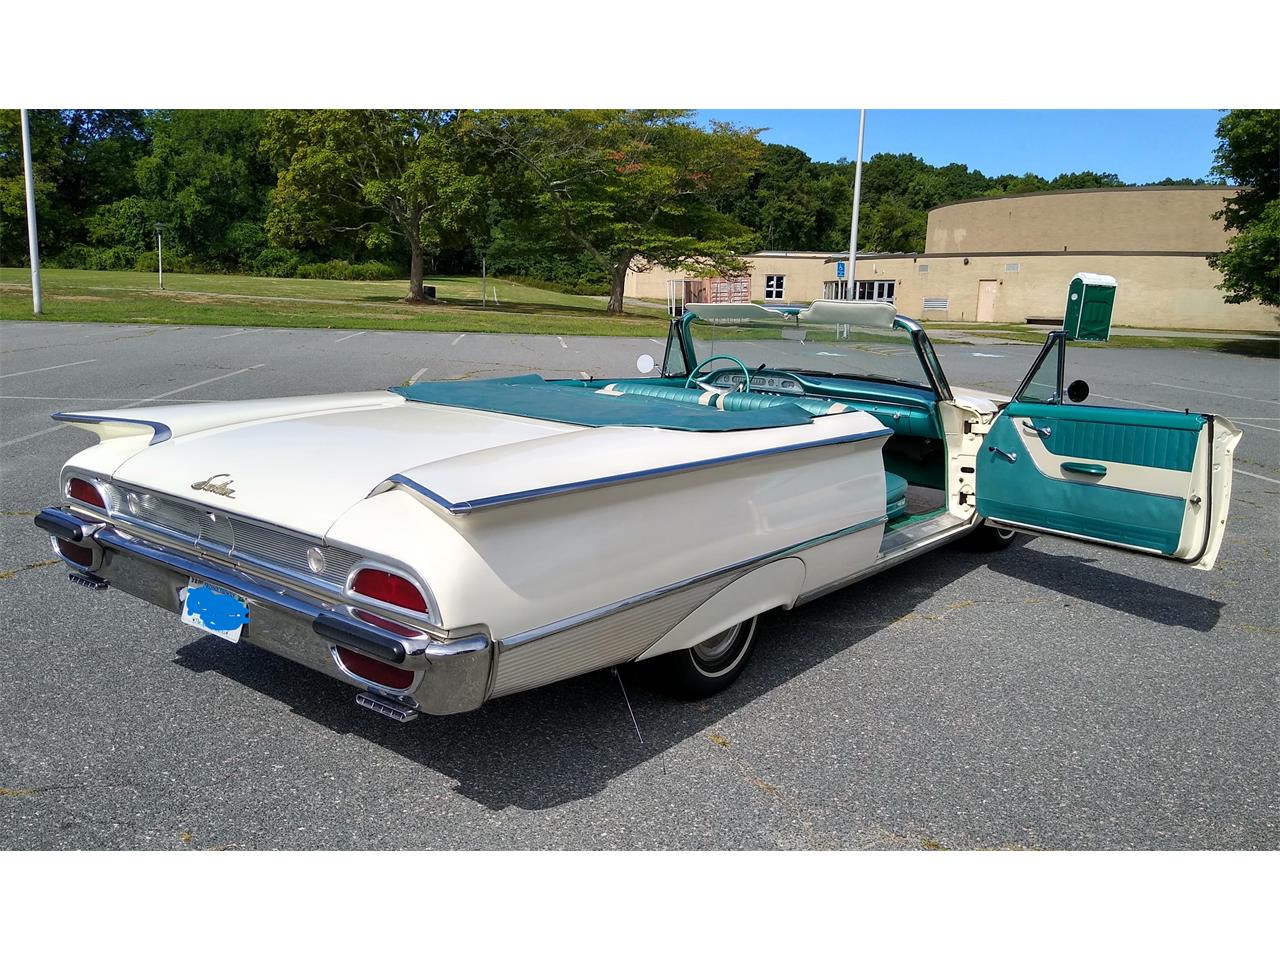 1960 Ford Galaxie Sunliner convertible